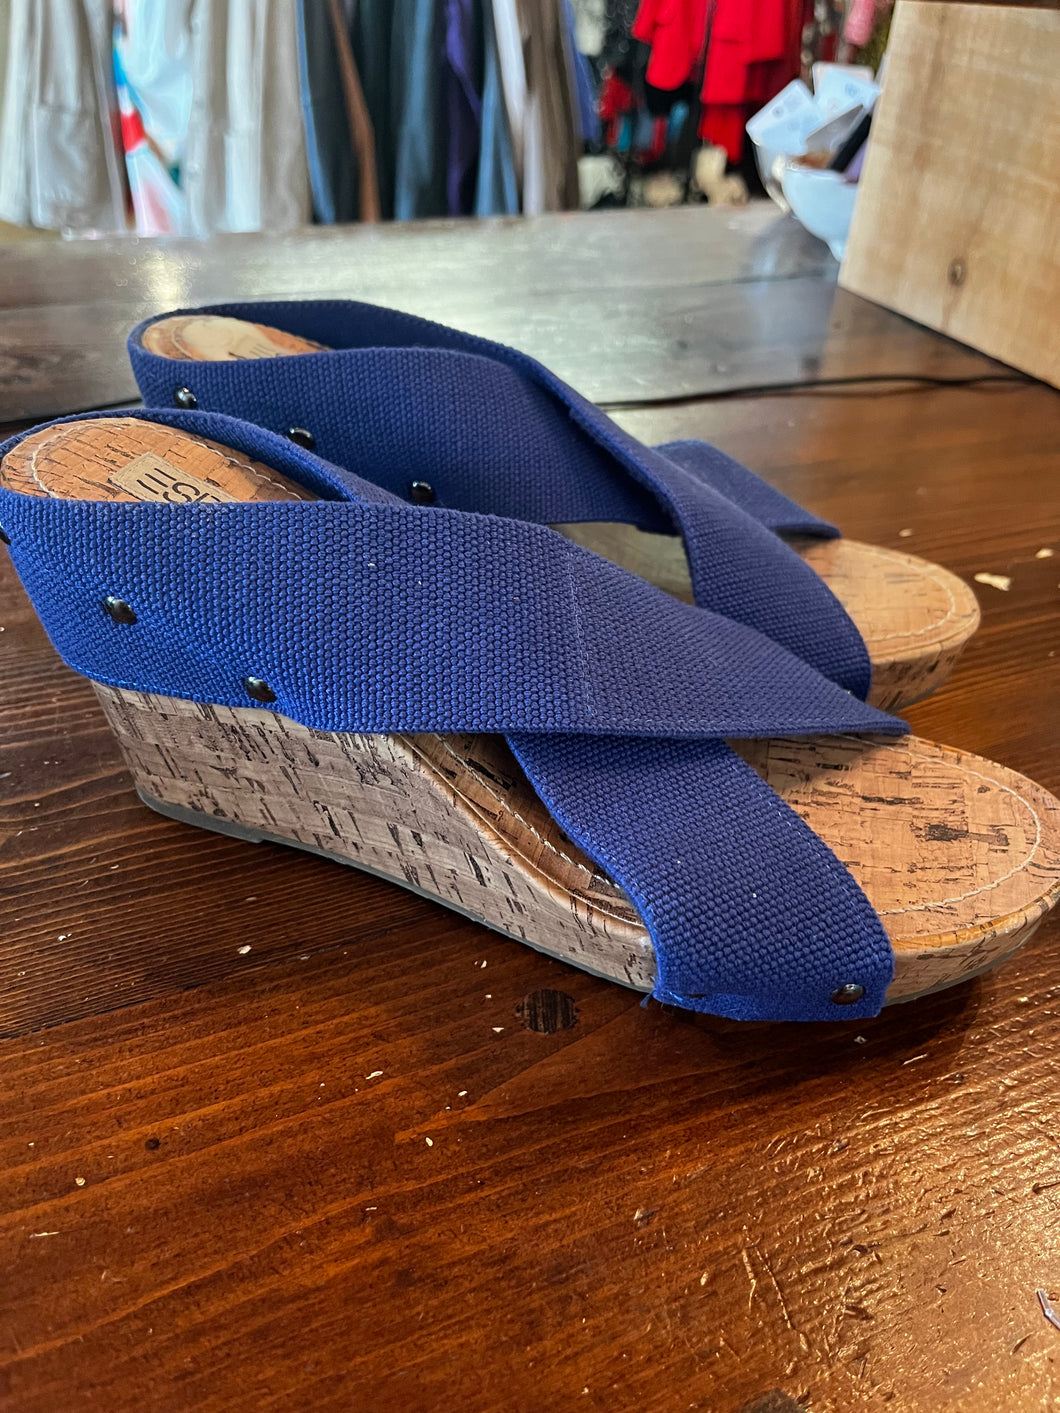 Blue Strappy Wedges (Size 9.5)